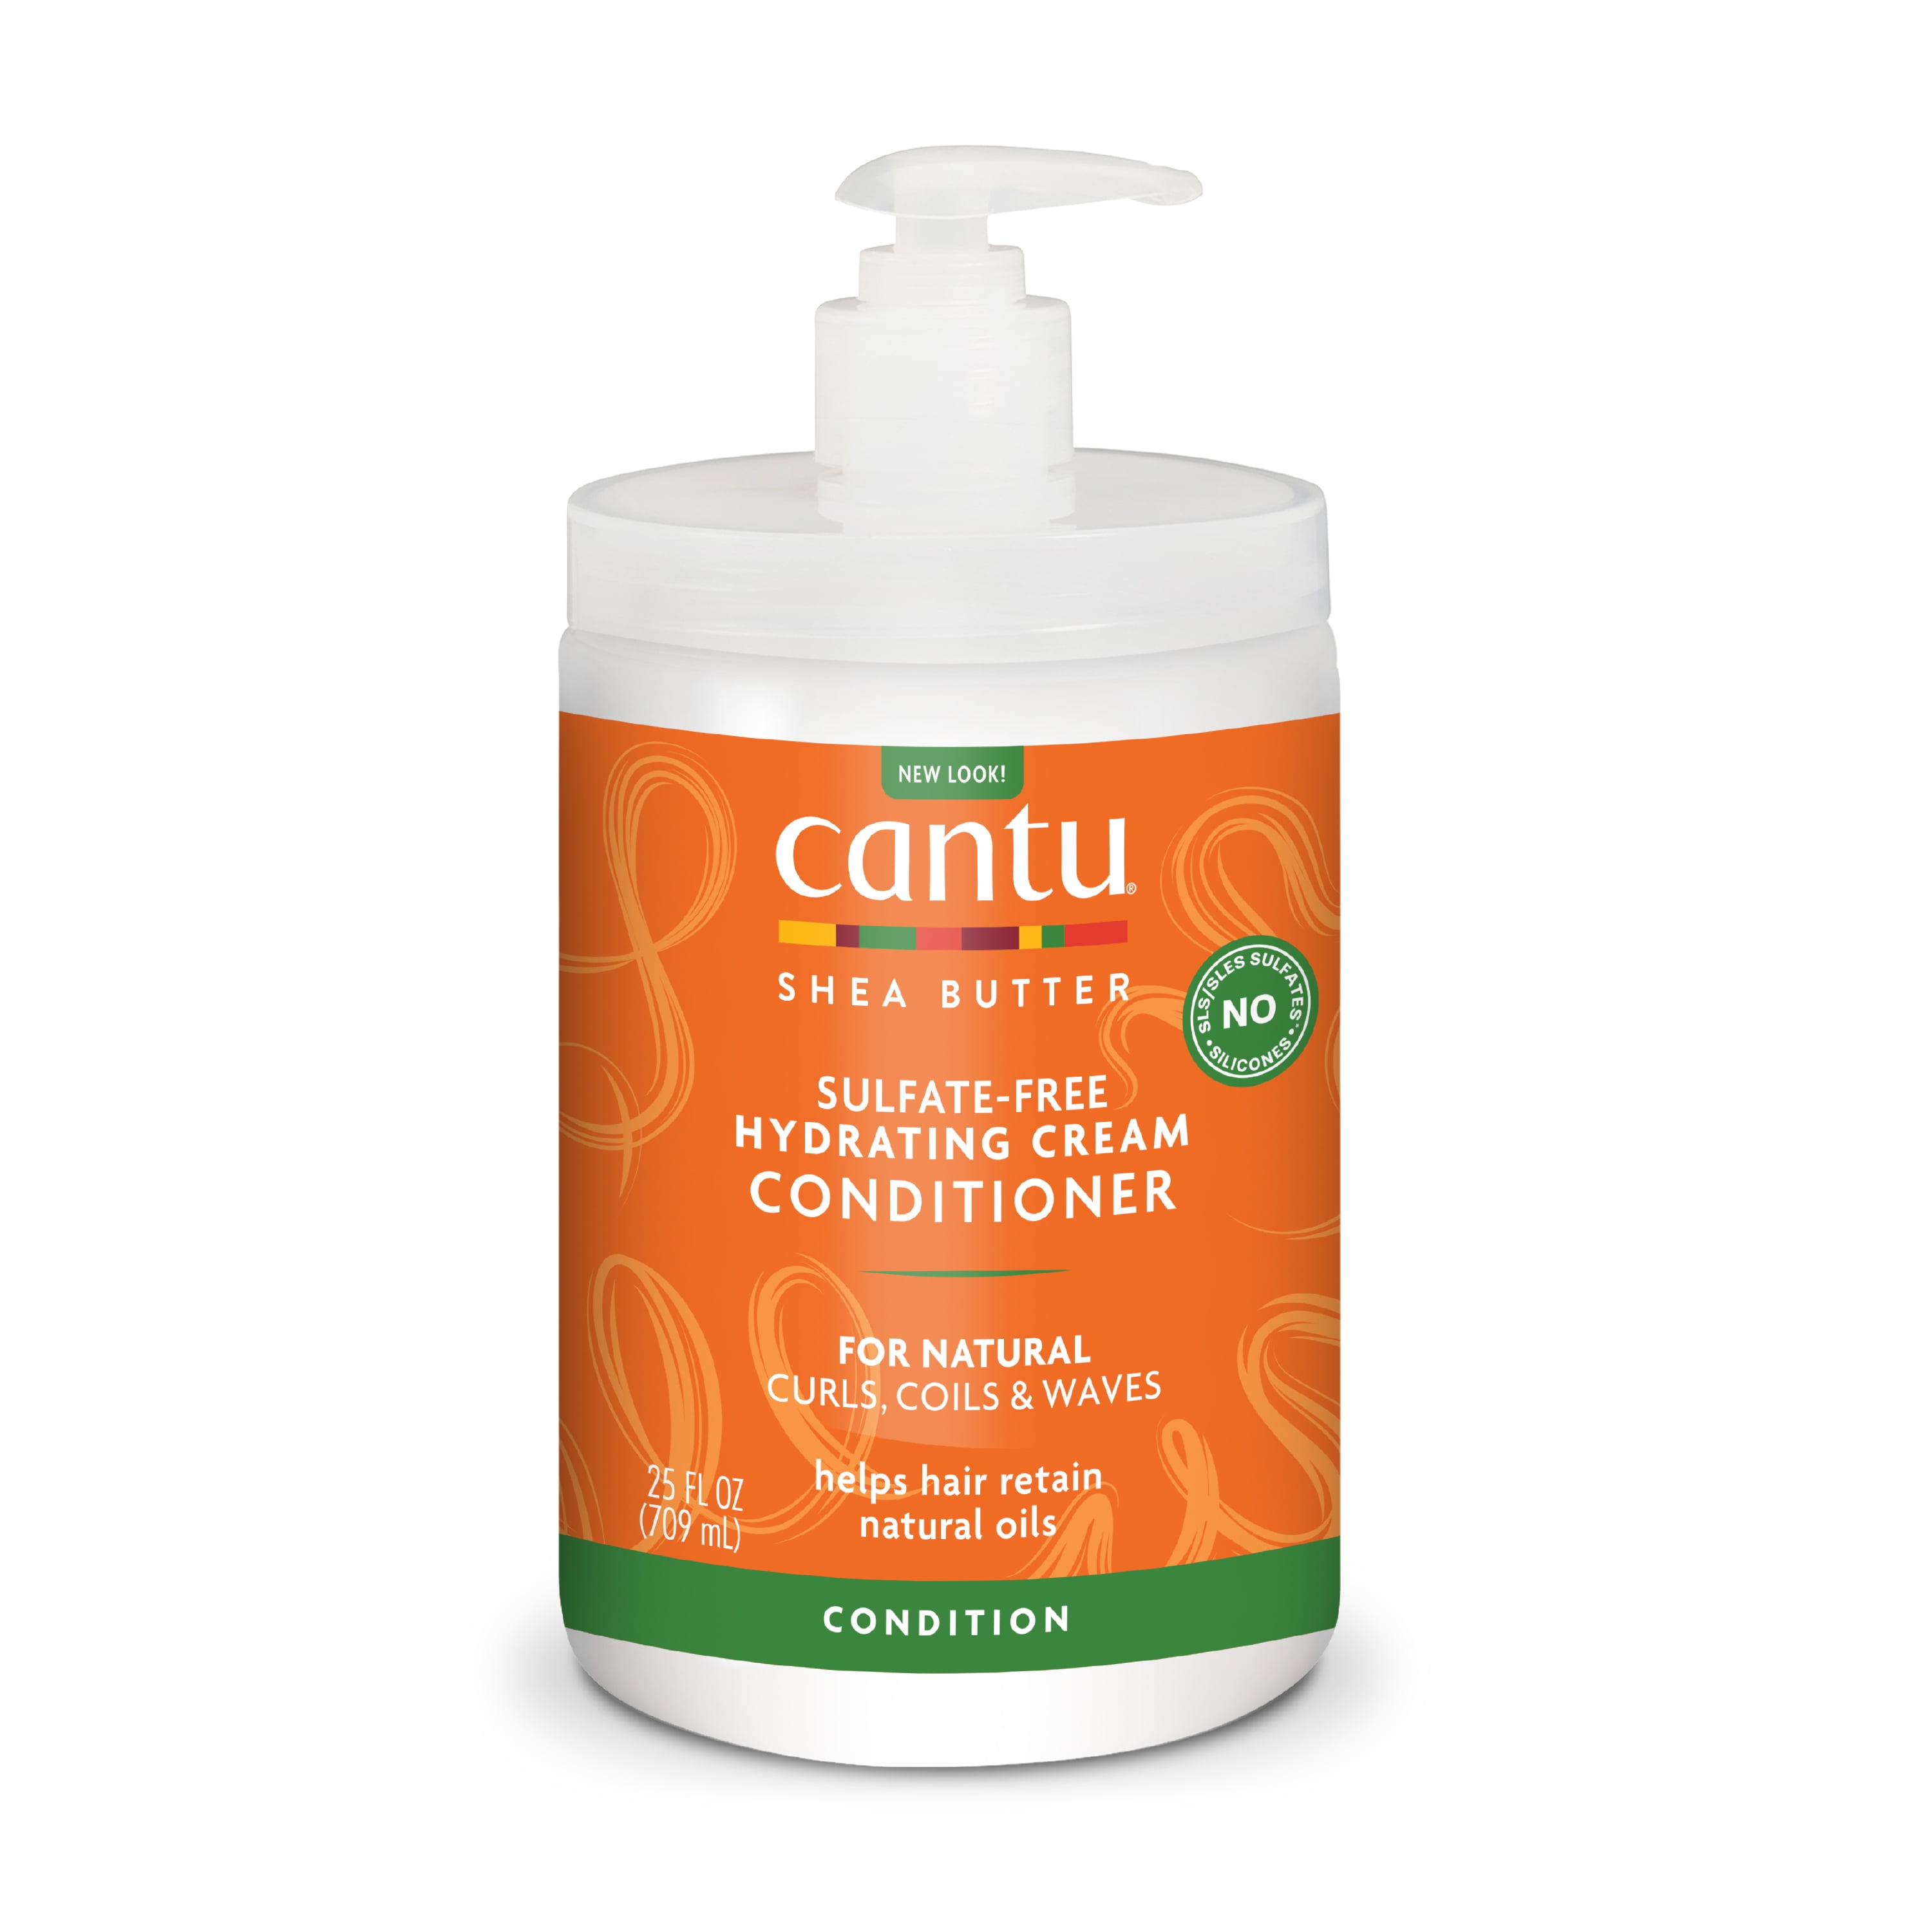 Cantu Hydrating Cream Conditioner for Natural Hair, Sulfate-Free with Shea Butter, 25 fl oz.